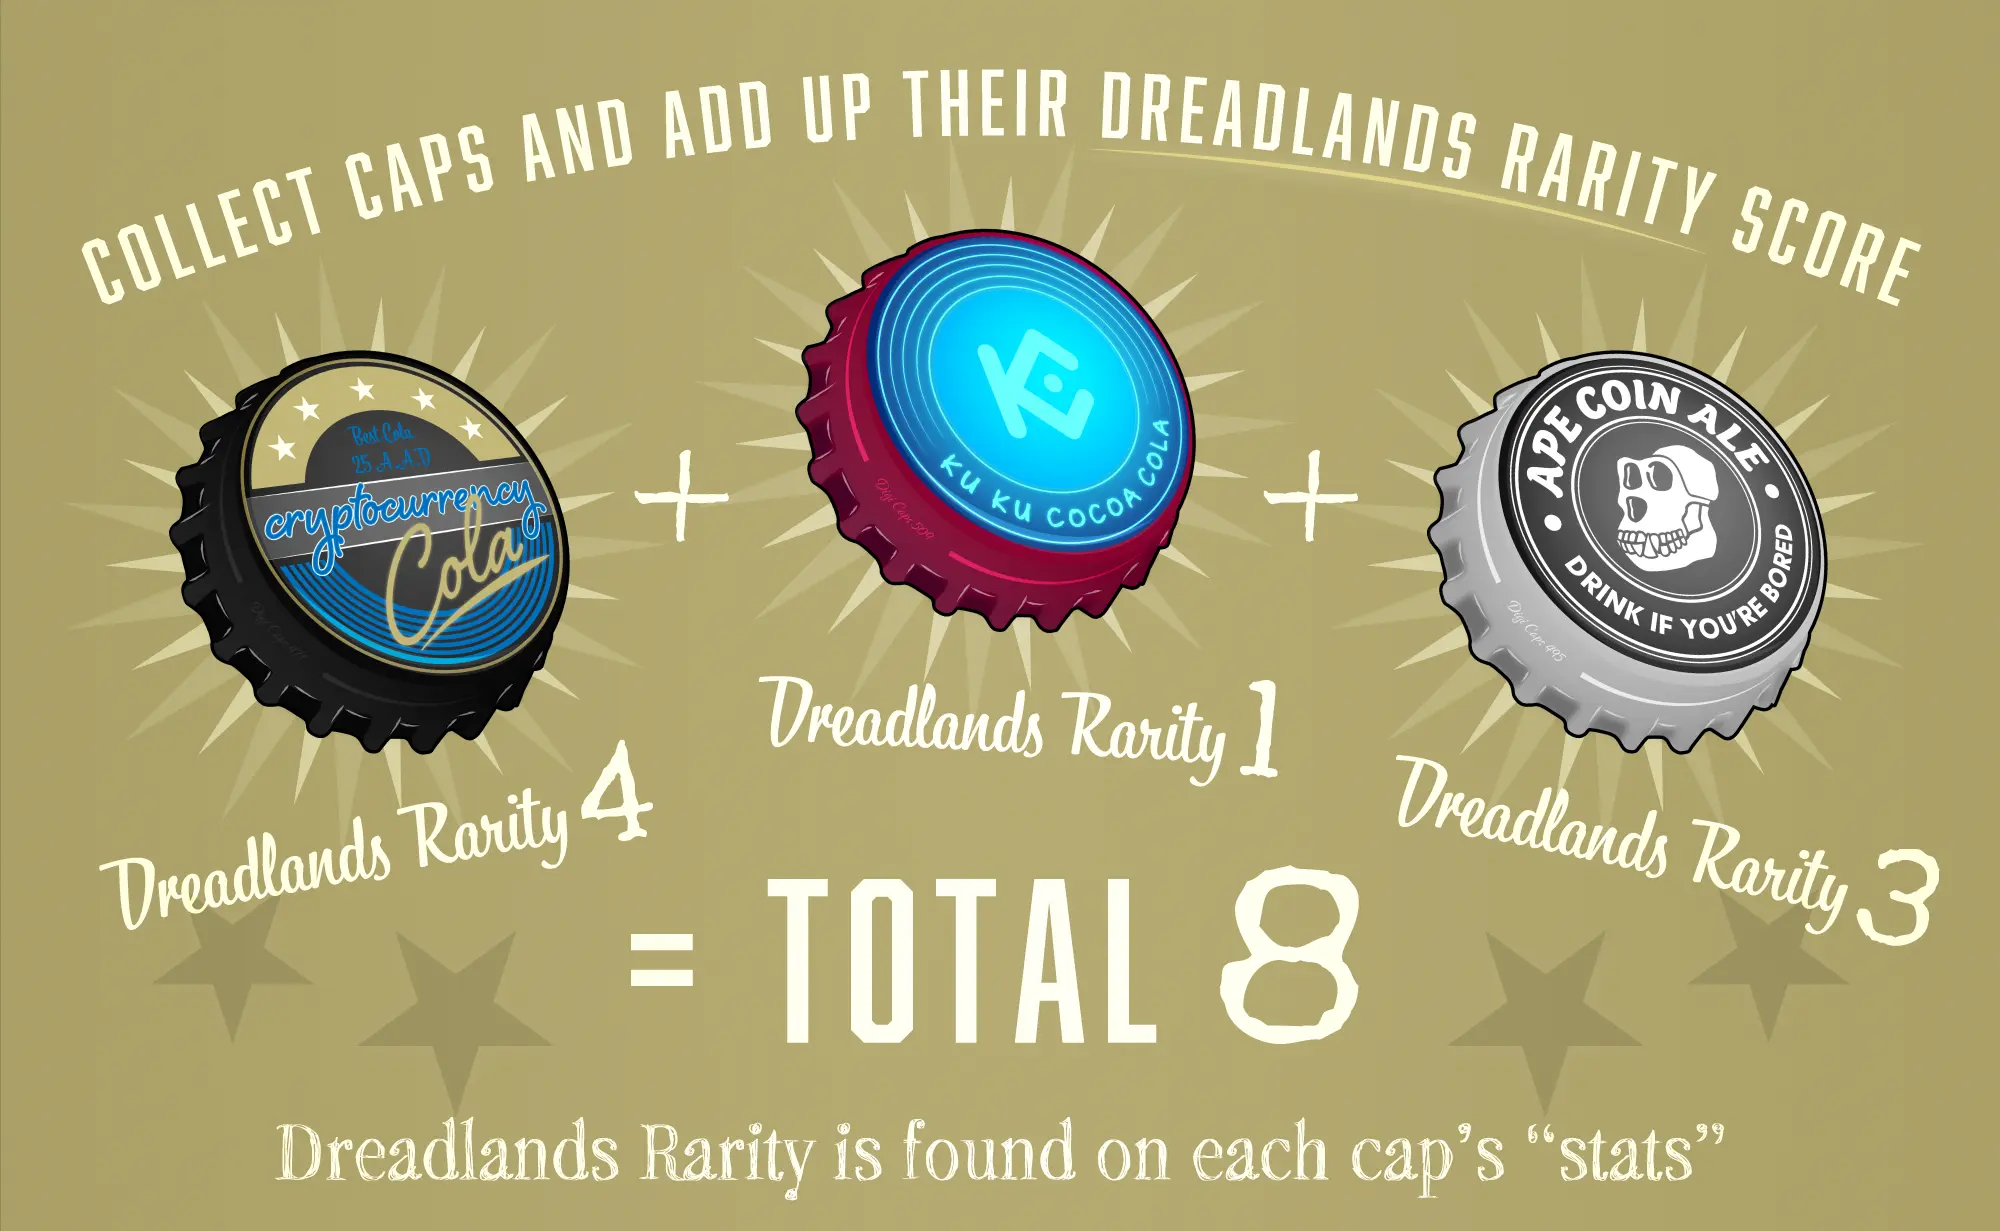 Collect Bottle Cap NFTs and moreover add up their rarity score for crypto rewards. Given that, each cap has a Dreadlands rarity score from 1 to 5